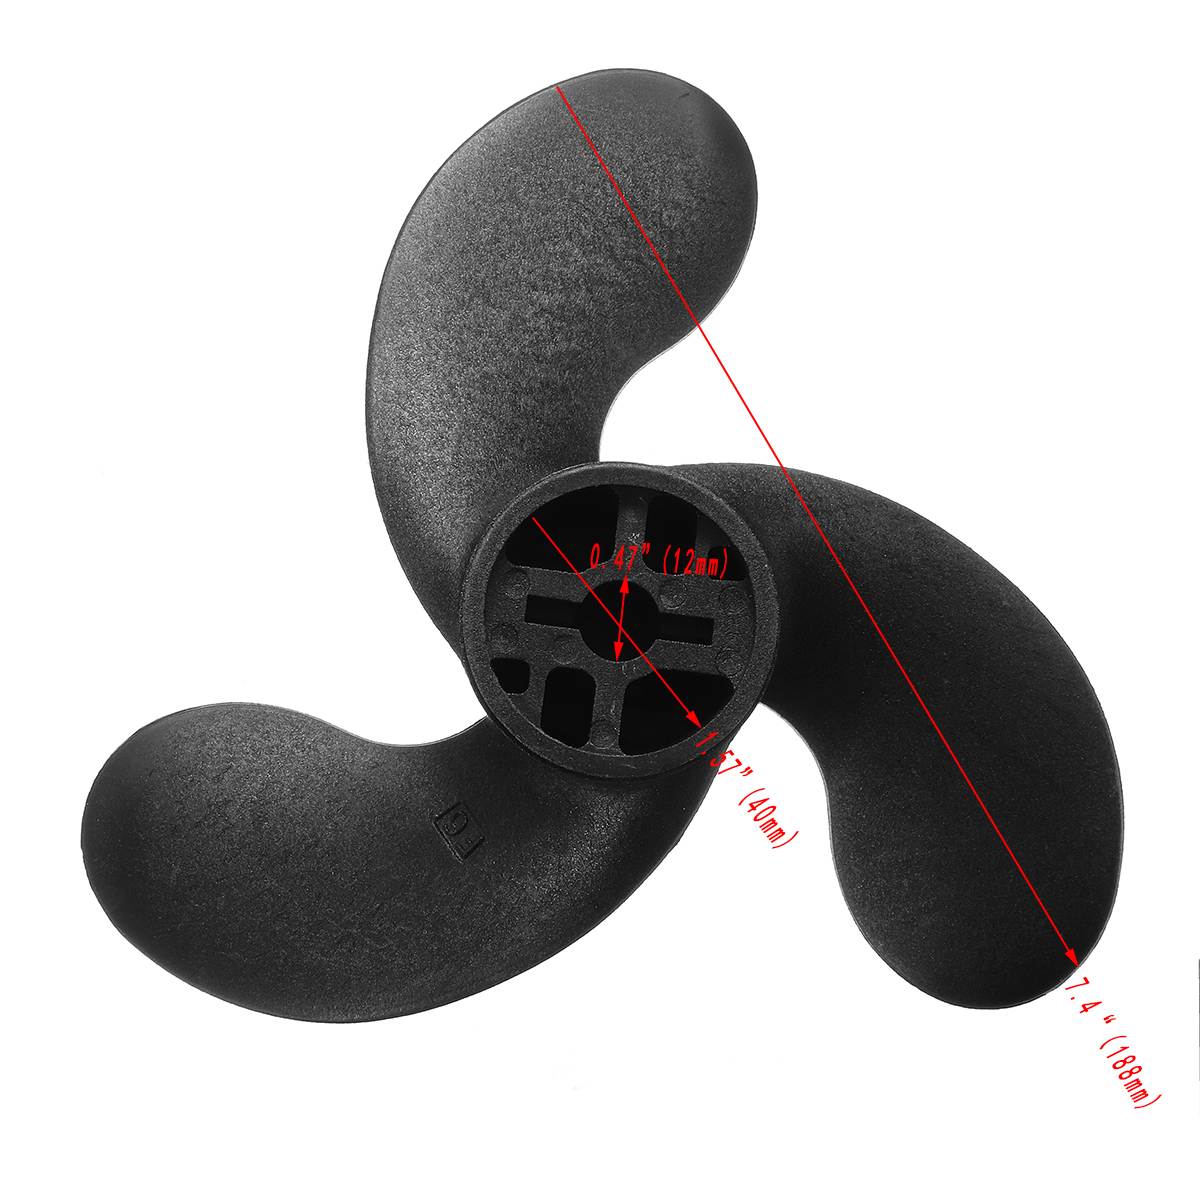 7.4 x 5.7 Marine Propeller For Nissan Tohatsu Evinrude Johnson 2.5-3.5HP 309-64107-0 Composite Plastic Outboard Propeller